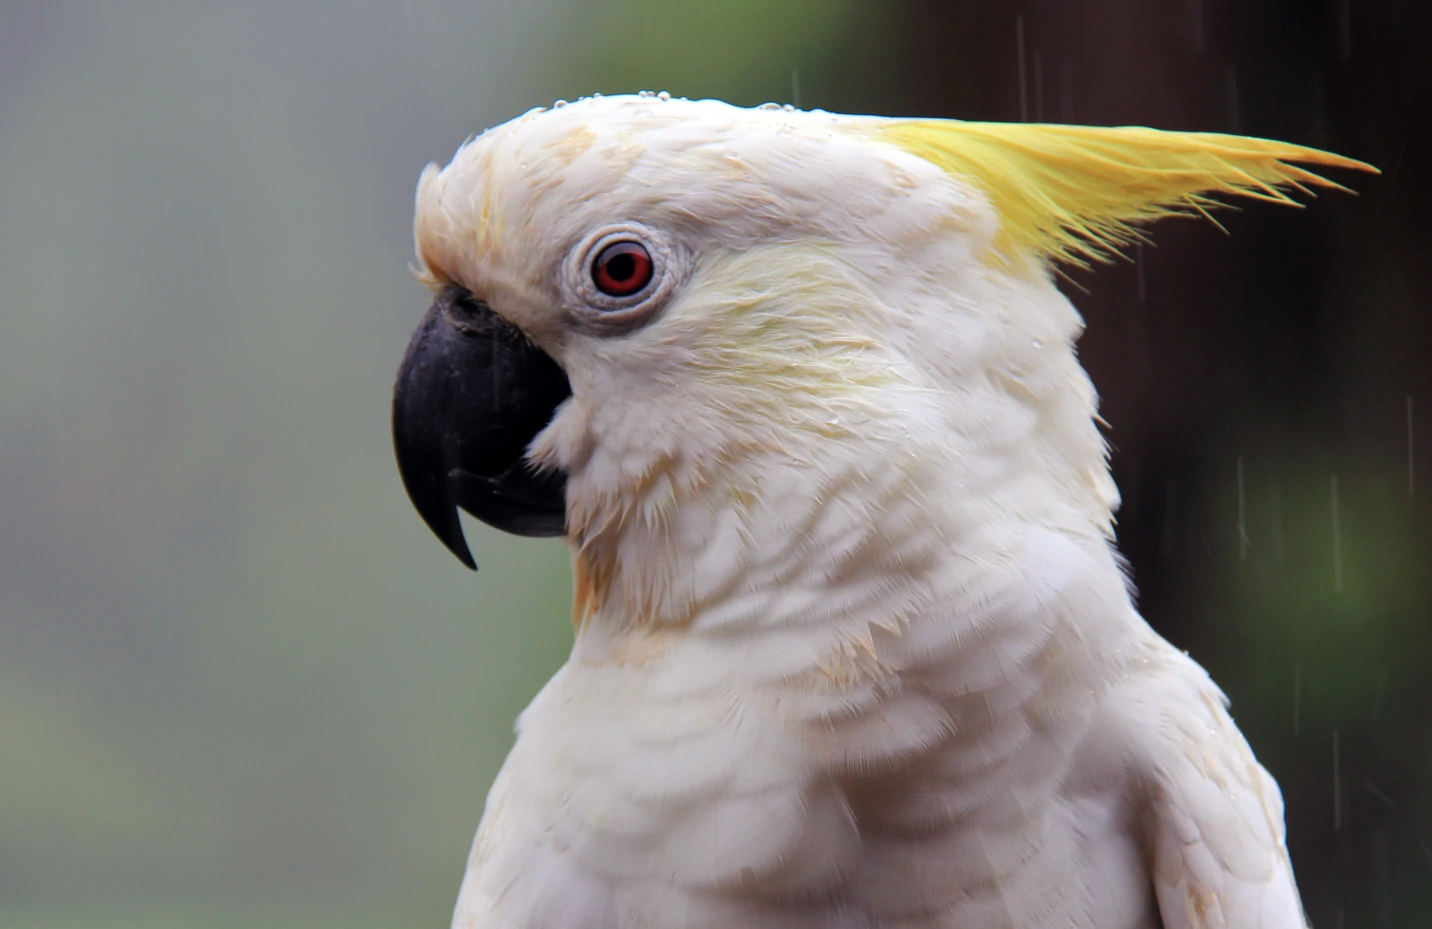 Profile of a white parrot with a yellow head feather.